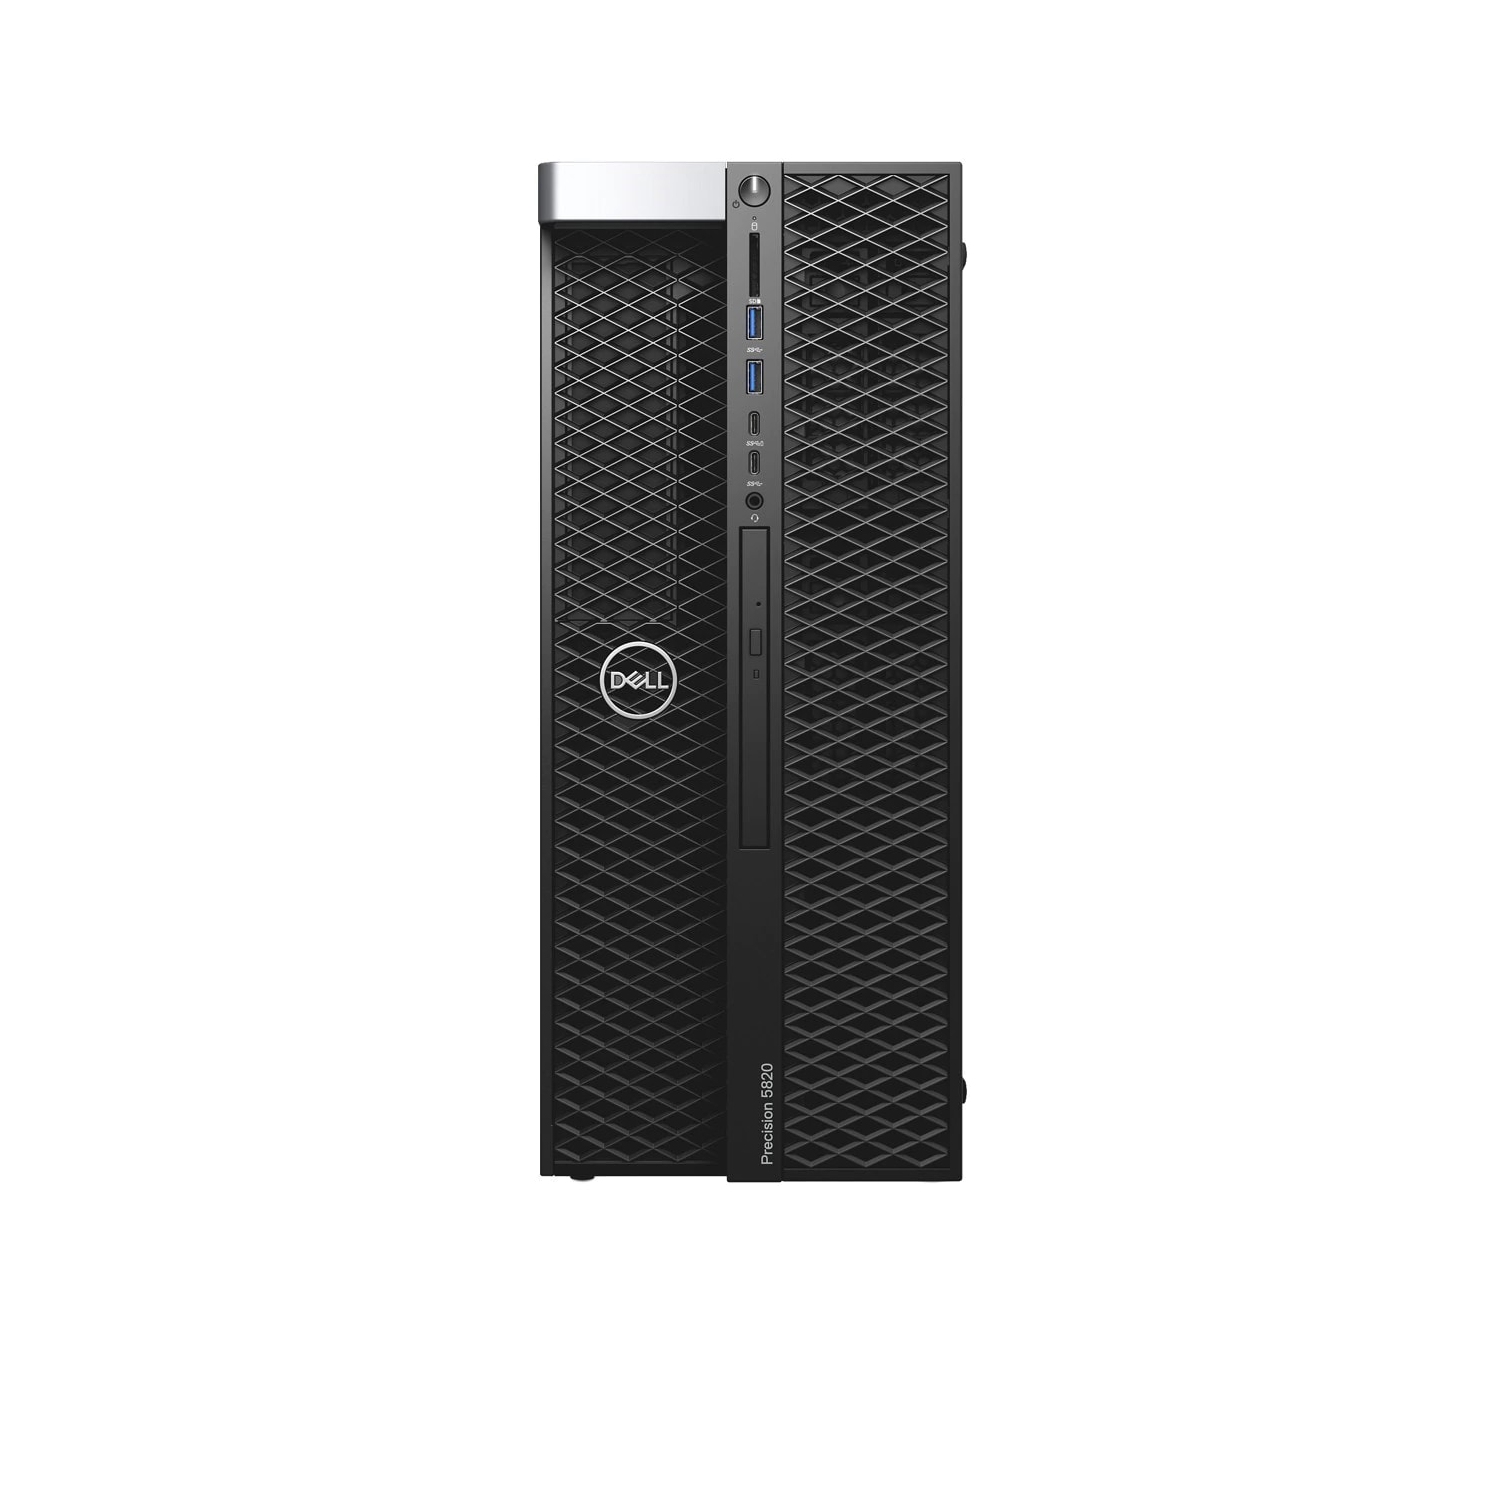 Refurbished (Excellent) - Dell Precision T5820 Workstation Desktop (2018), Core i9, 1TB SSD, 64GB RAM, RTX 4000, 10 Cores @ 4.5 GHz, 10th Gen CPU Certified Refurbished